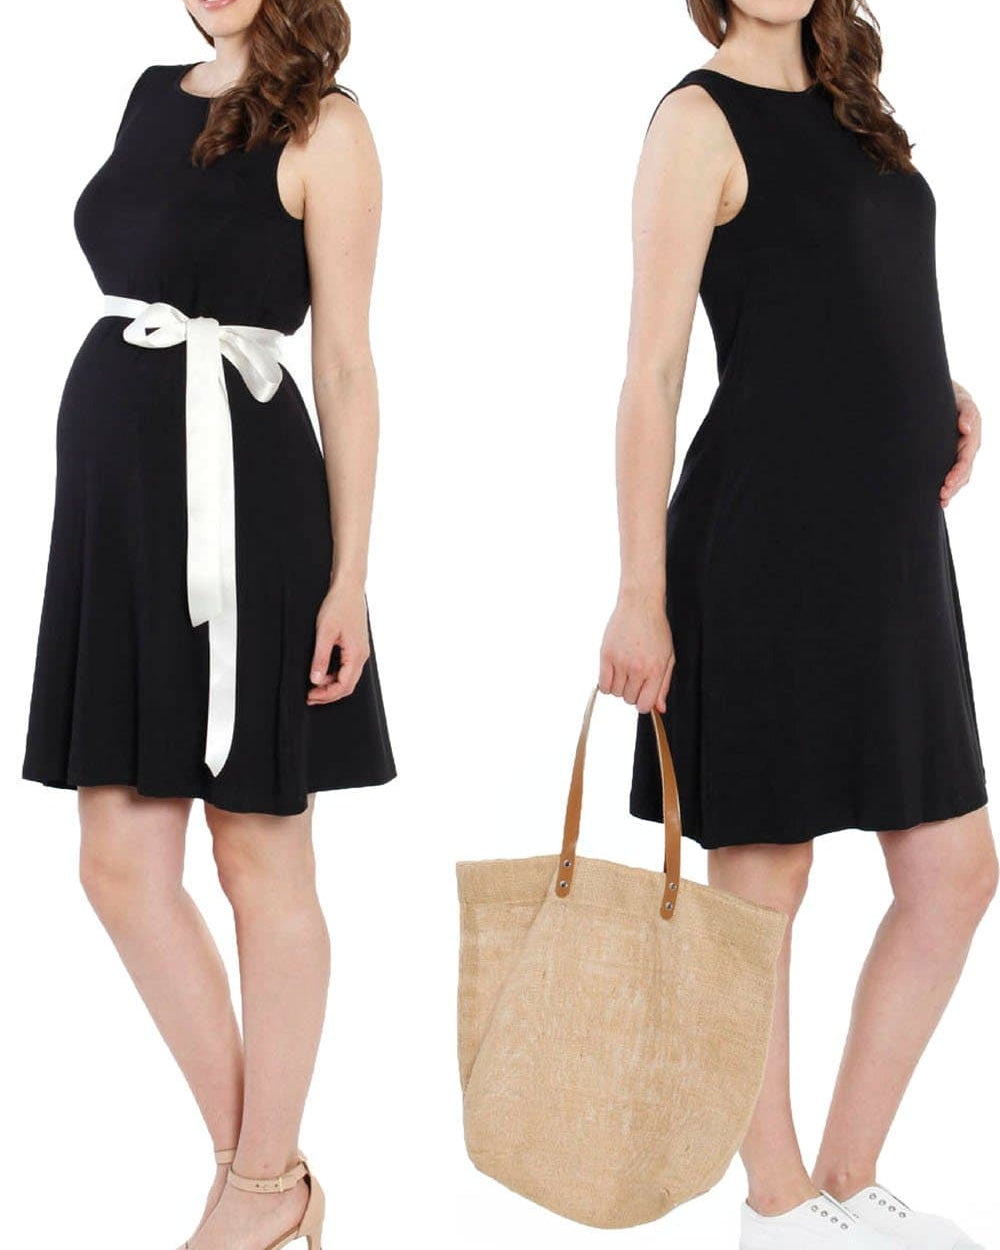 Maternity Shift Party Bow Details Dress - Black duo (128122716181)